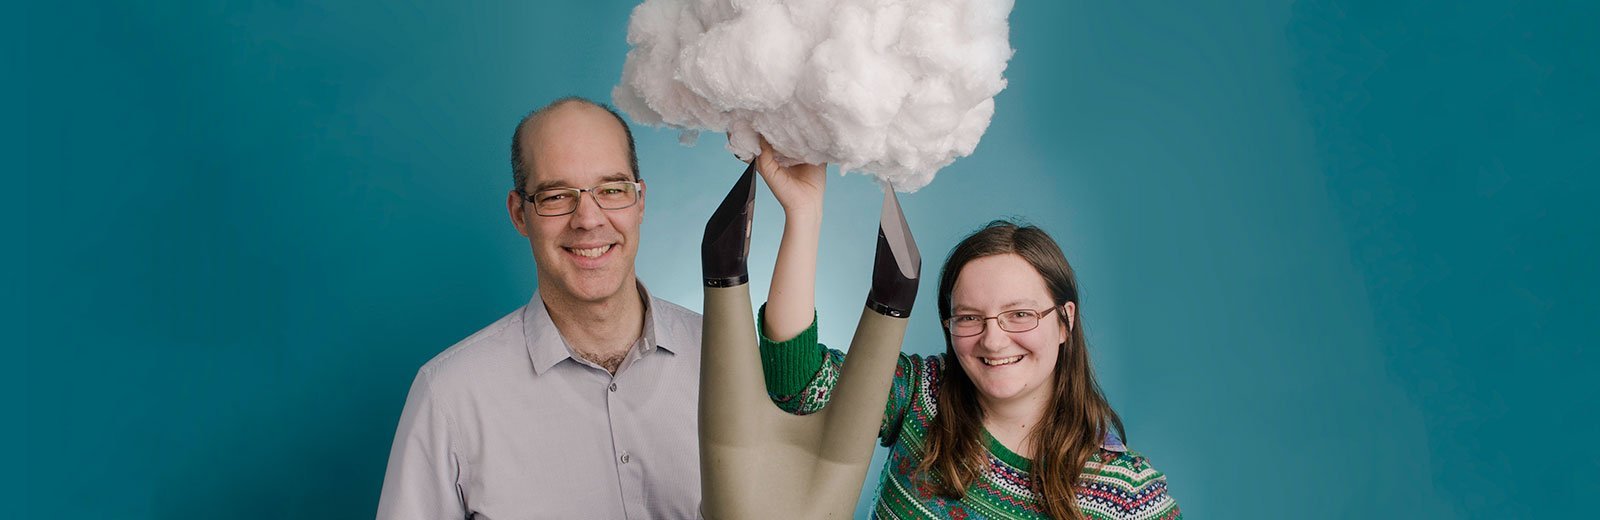 Physics professor Raymond Shaw is doing the next generation of cloud research with the help of graduate student Susanne Glienke--and holographic imaging.